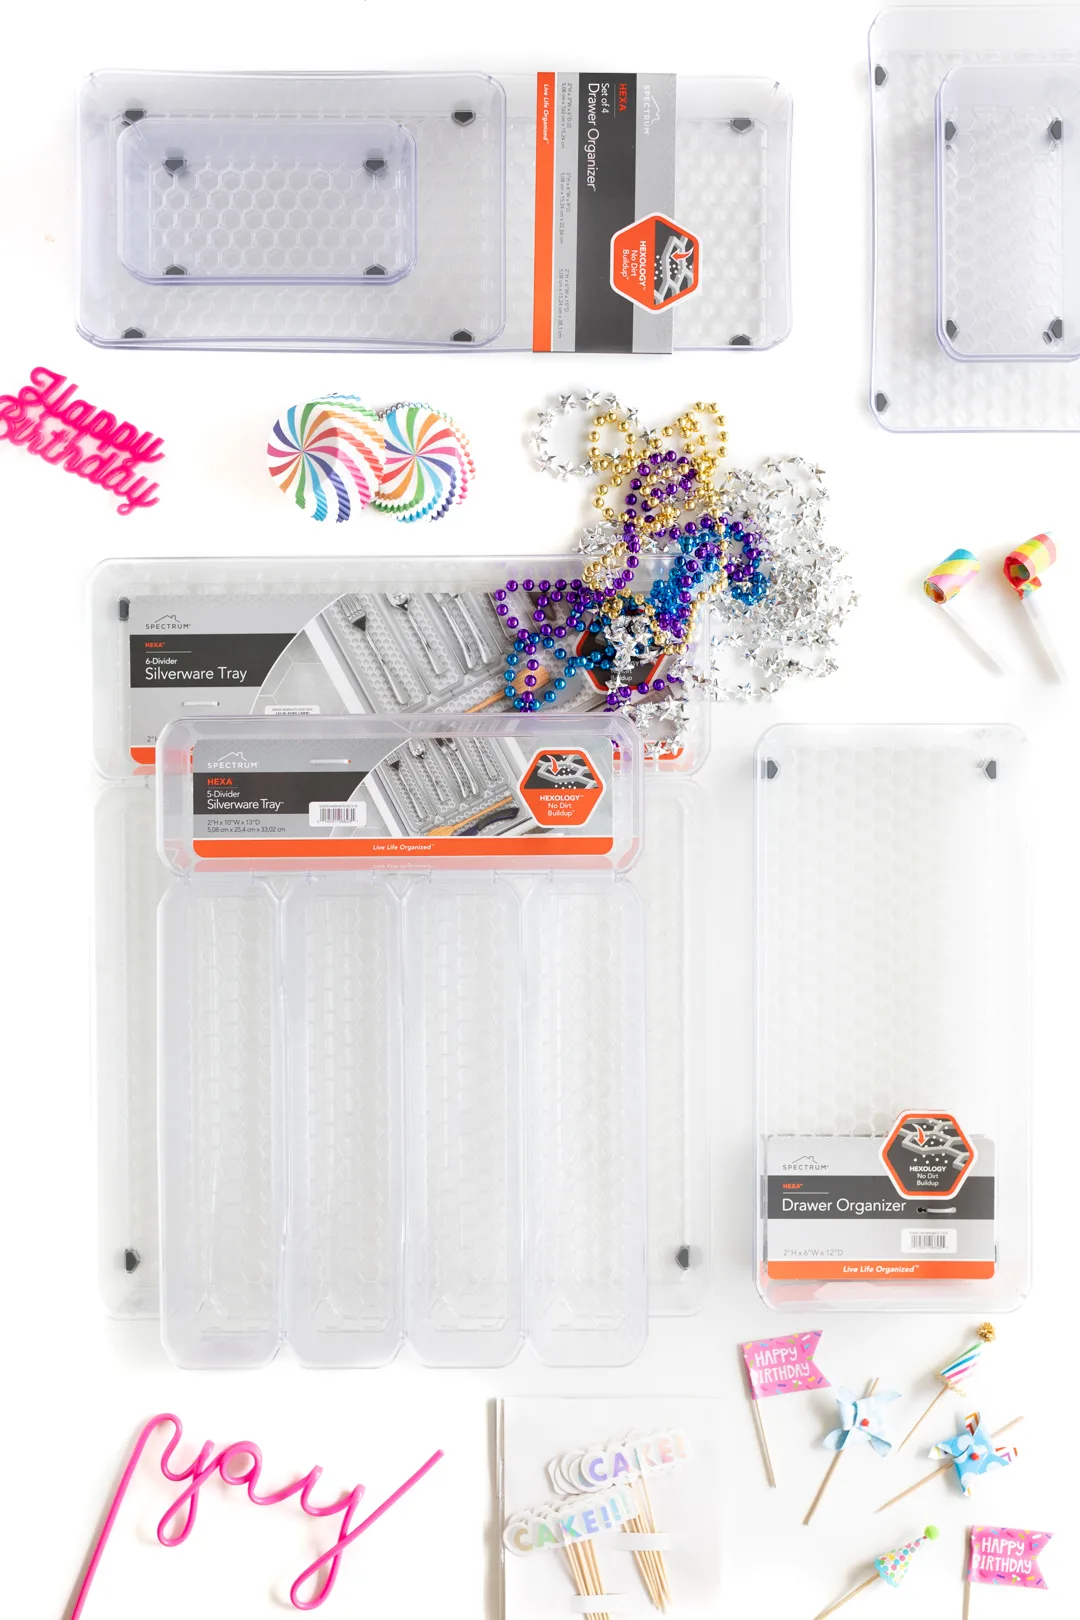 HEXA organizers in a variety of sizes.